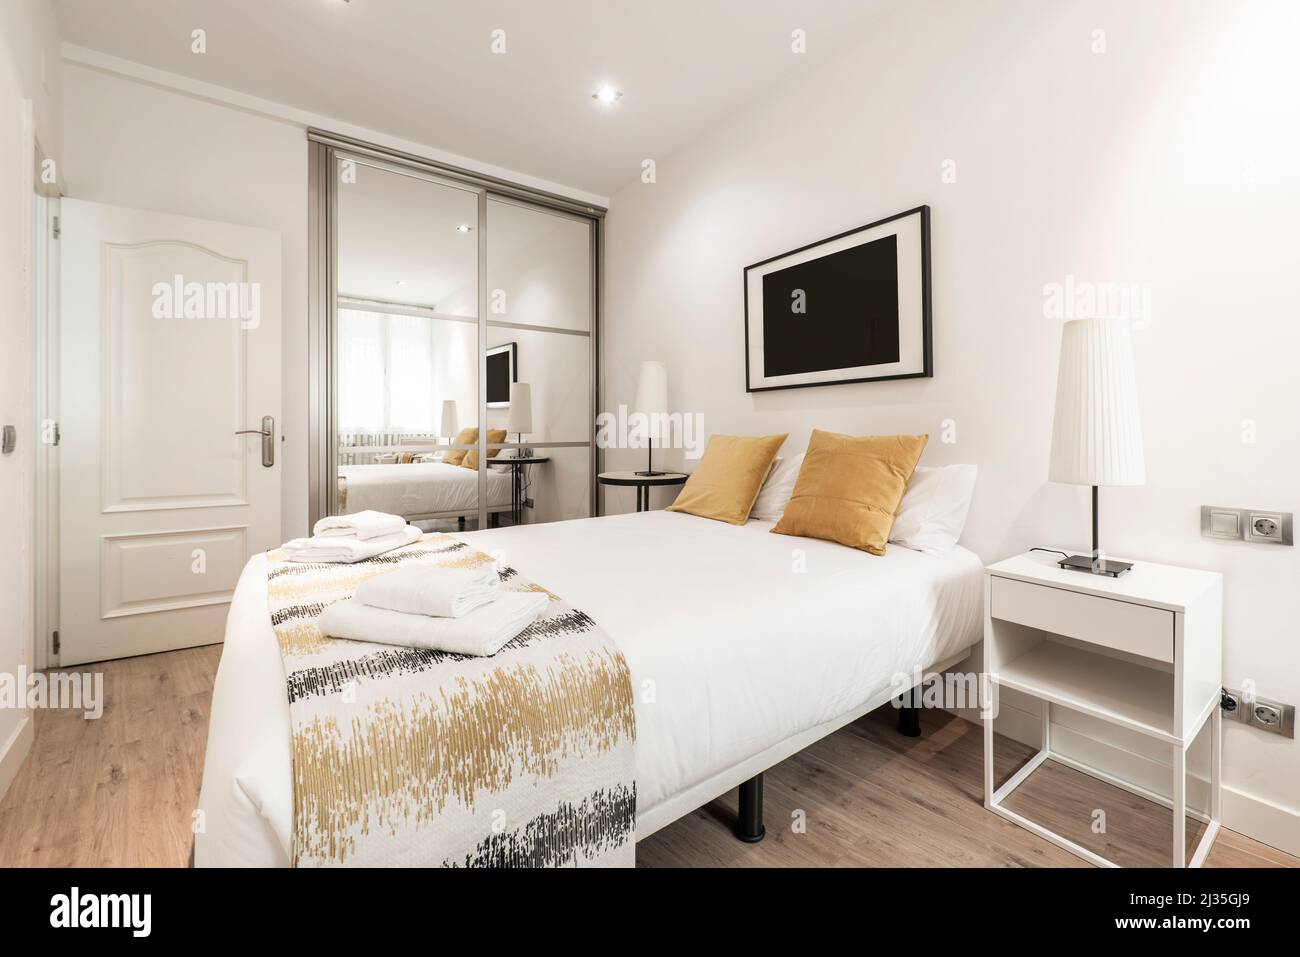 Bedroom with a large bed, gold cushions, a built-in wardrobe with sliding glass doors, uneven bedside tables and wooden floors in a short-term rental Stock Photo